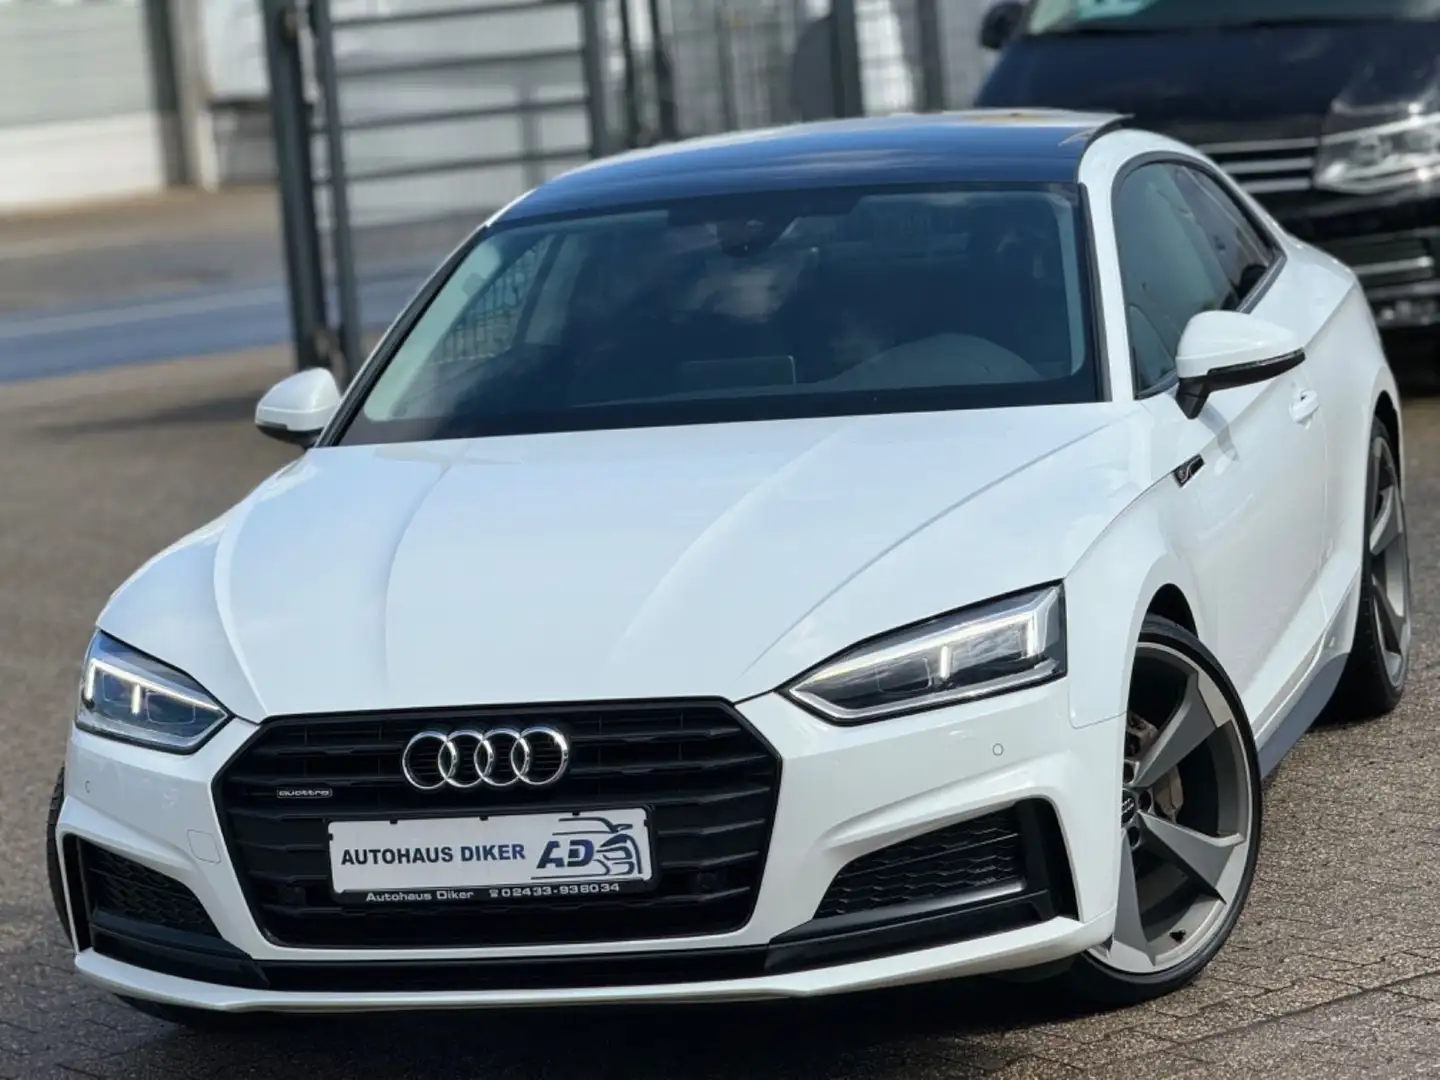 Audi A5 Coupe 2.0 TDI quattro S line Pano, 20"Rotor Wit - 1